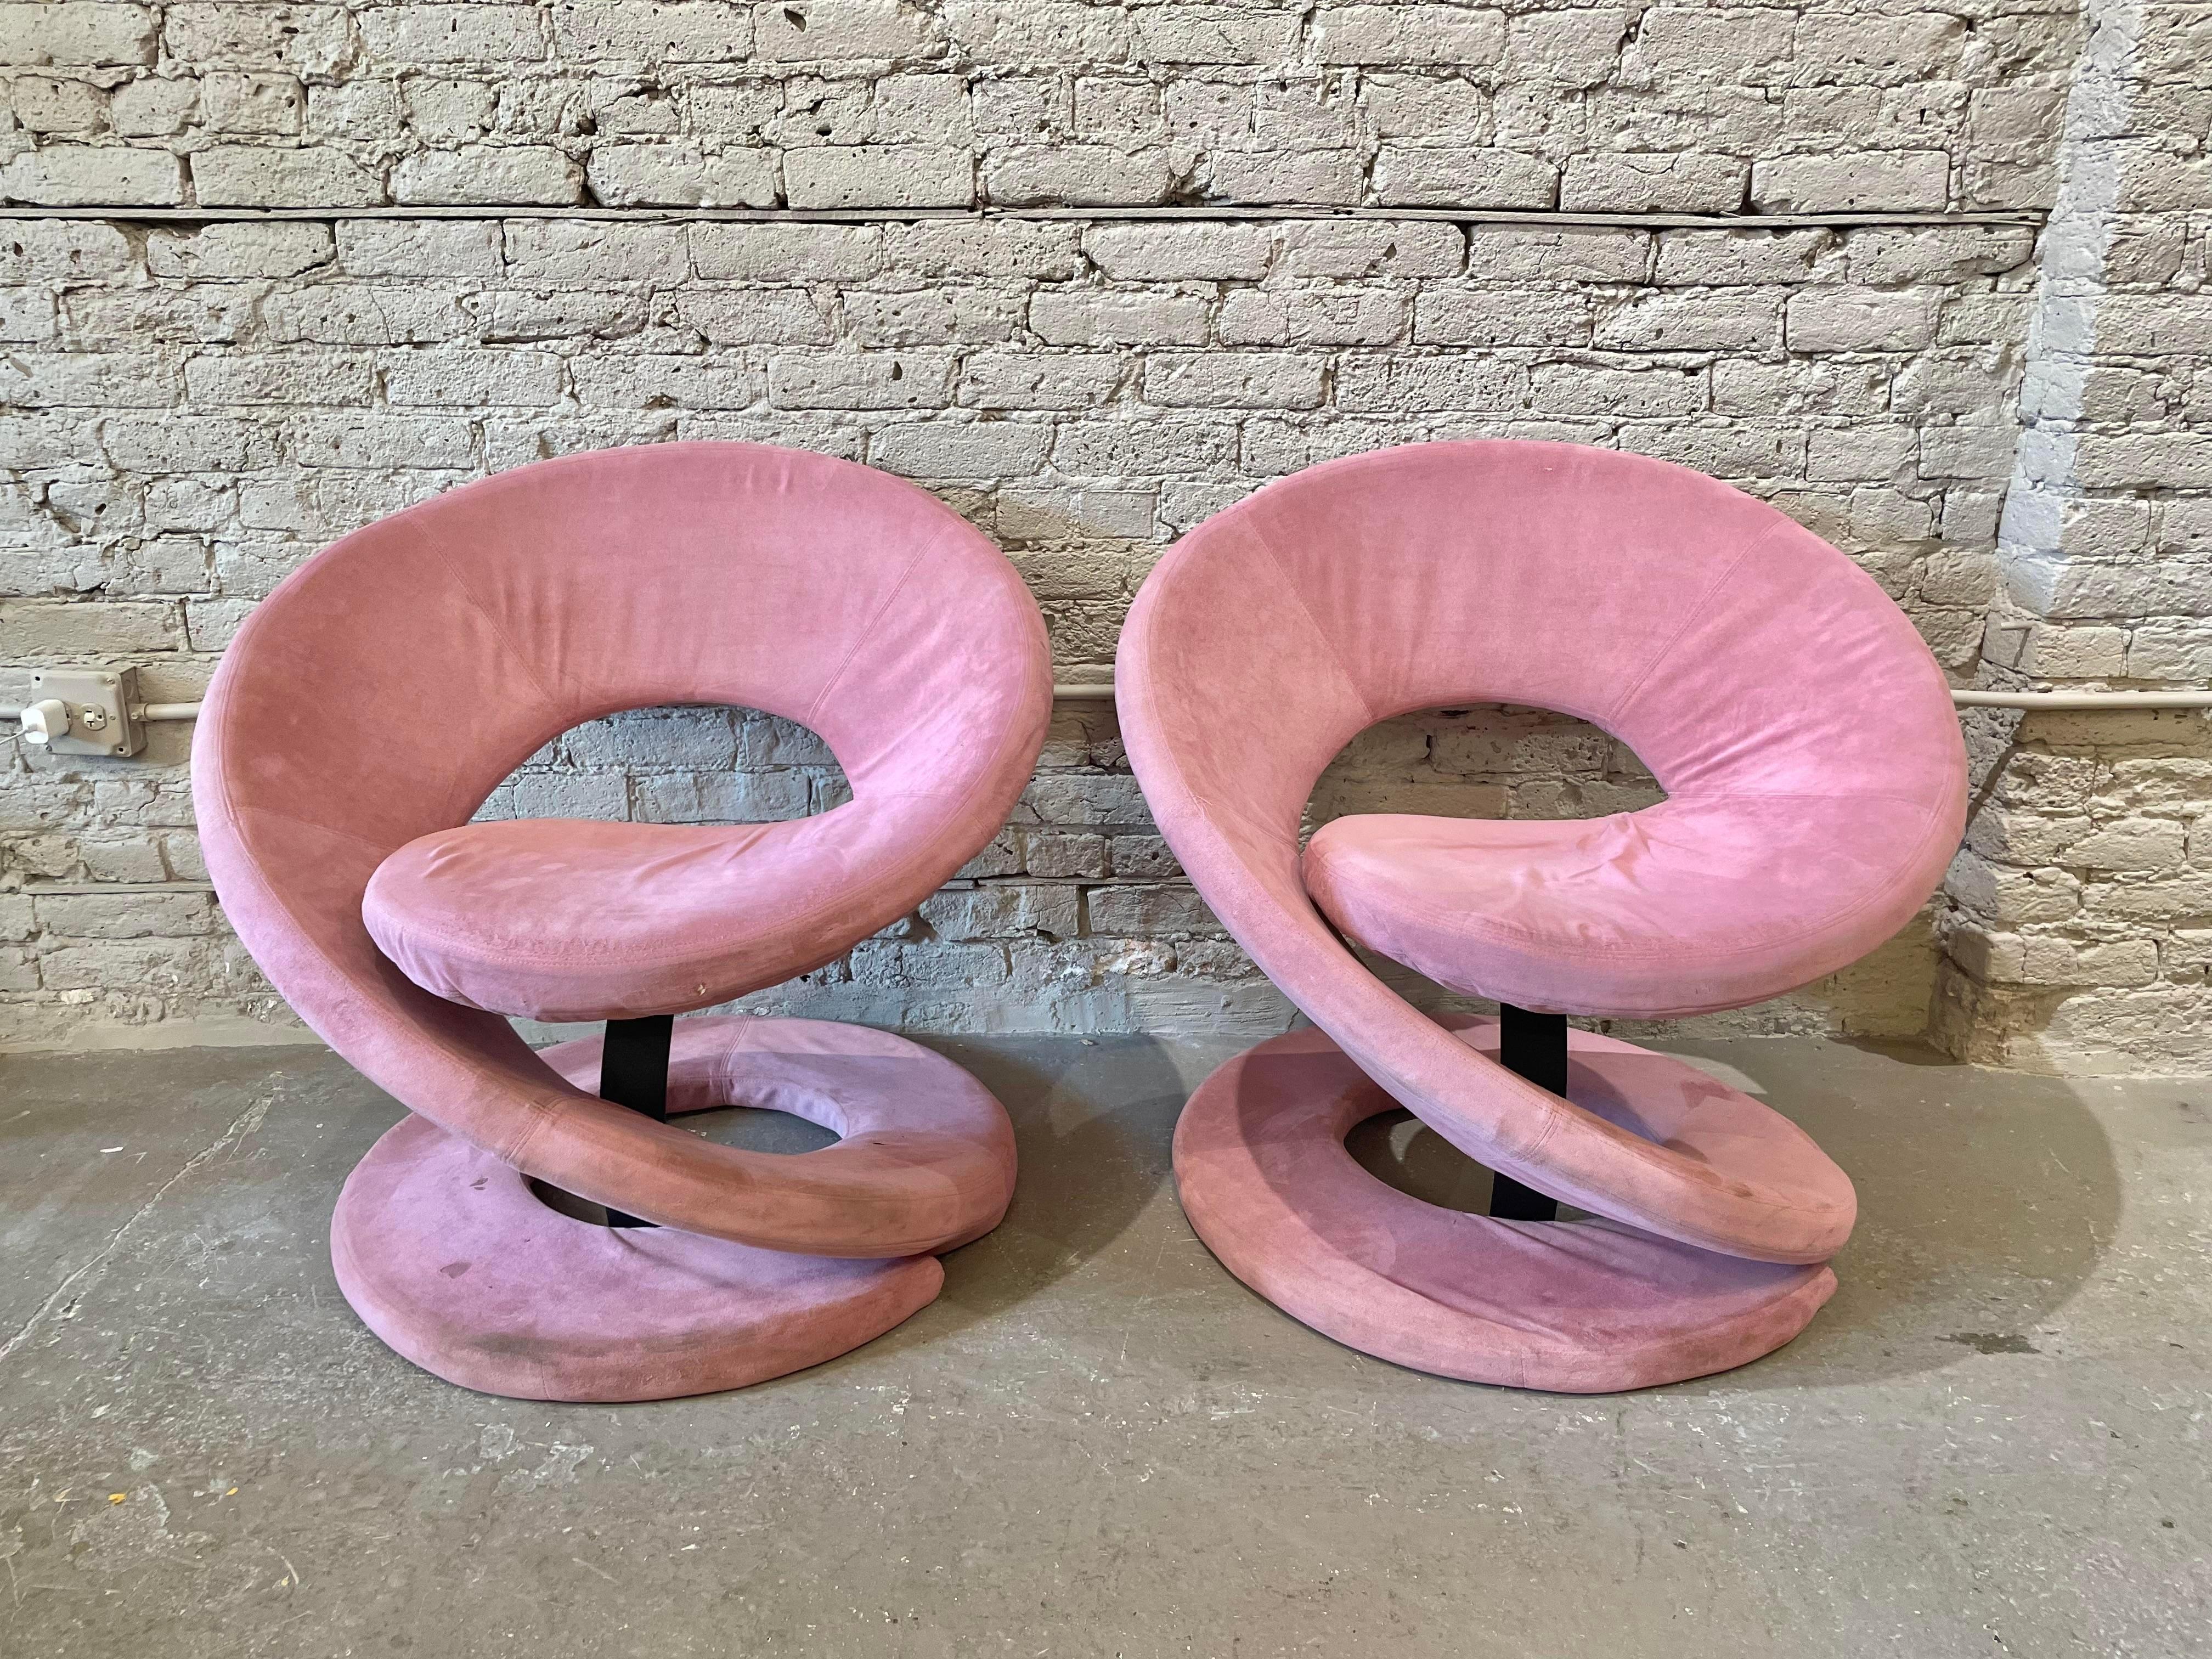 1980s Postmodern Corkscrew Chairs Attributed to Quebec 69 Jaymar - a Pair For Sale 1